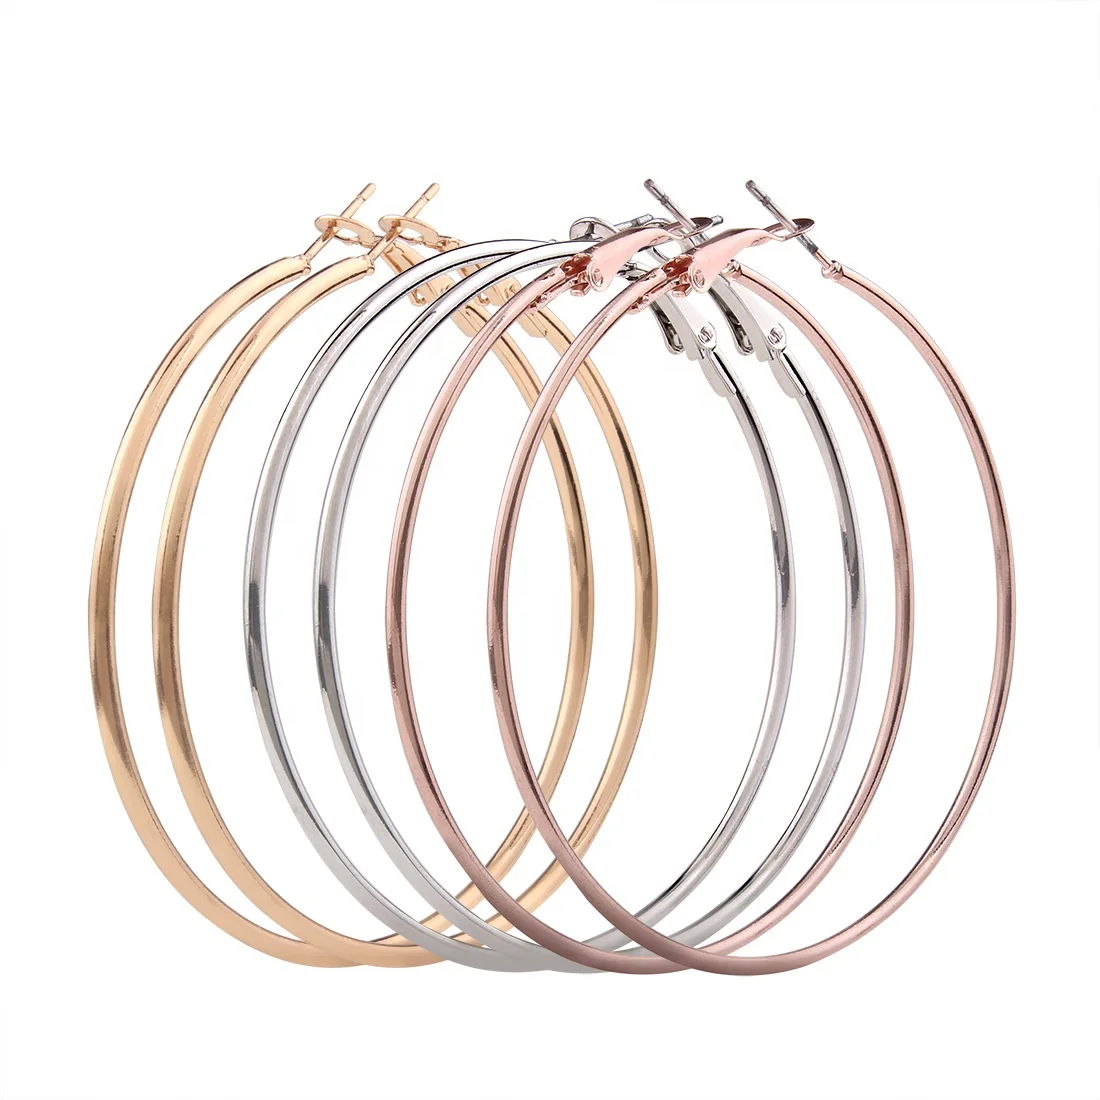 

3-color hoop earrings 14K gold plated rose gold plated silver Huggie hoop earrings suitable for girls hypoallergenic jewelry, Picture shows